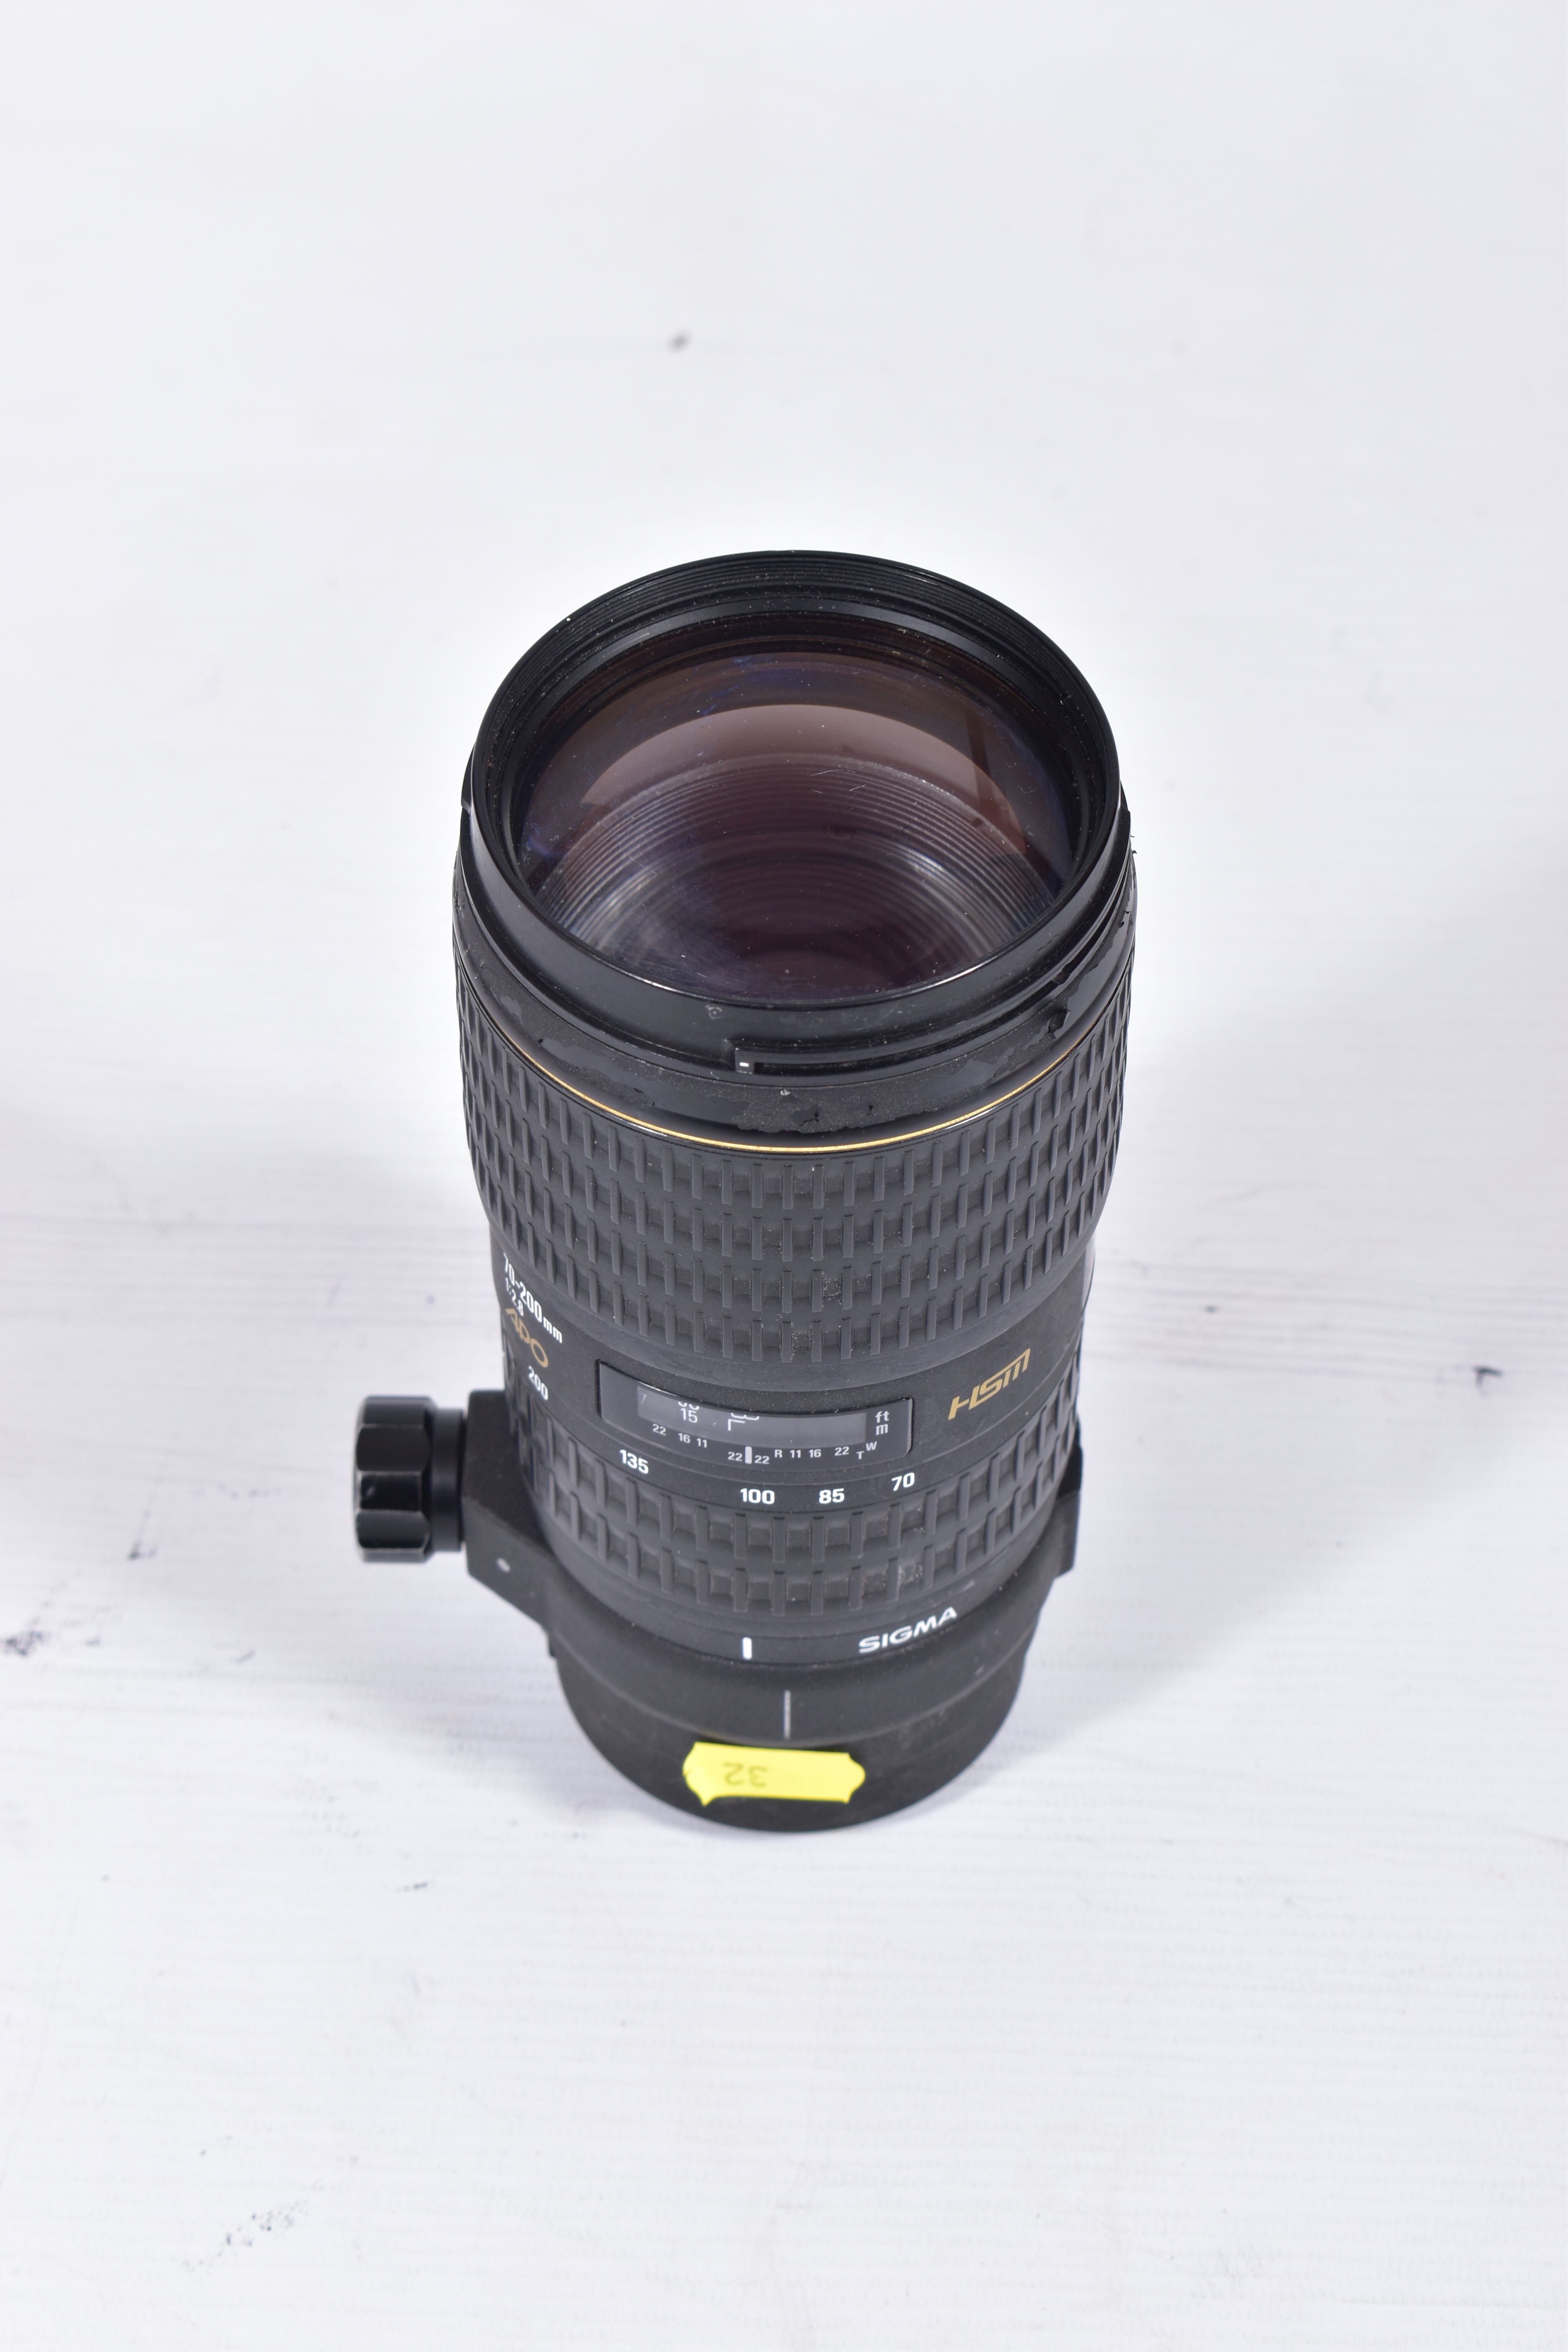 FOUR CANON AND CANON FIT ZOOM LENSES comprising of a Canon 70-300 f4 EF IS USM lens, a Sigma 70- - Image 2 of 10